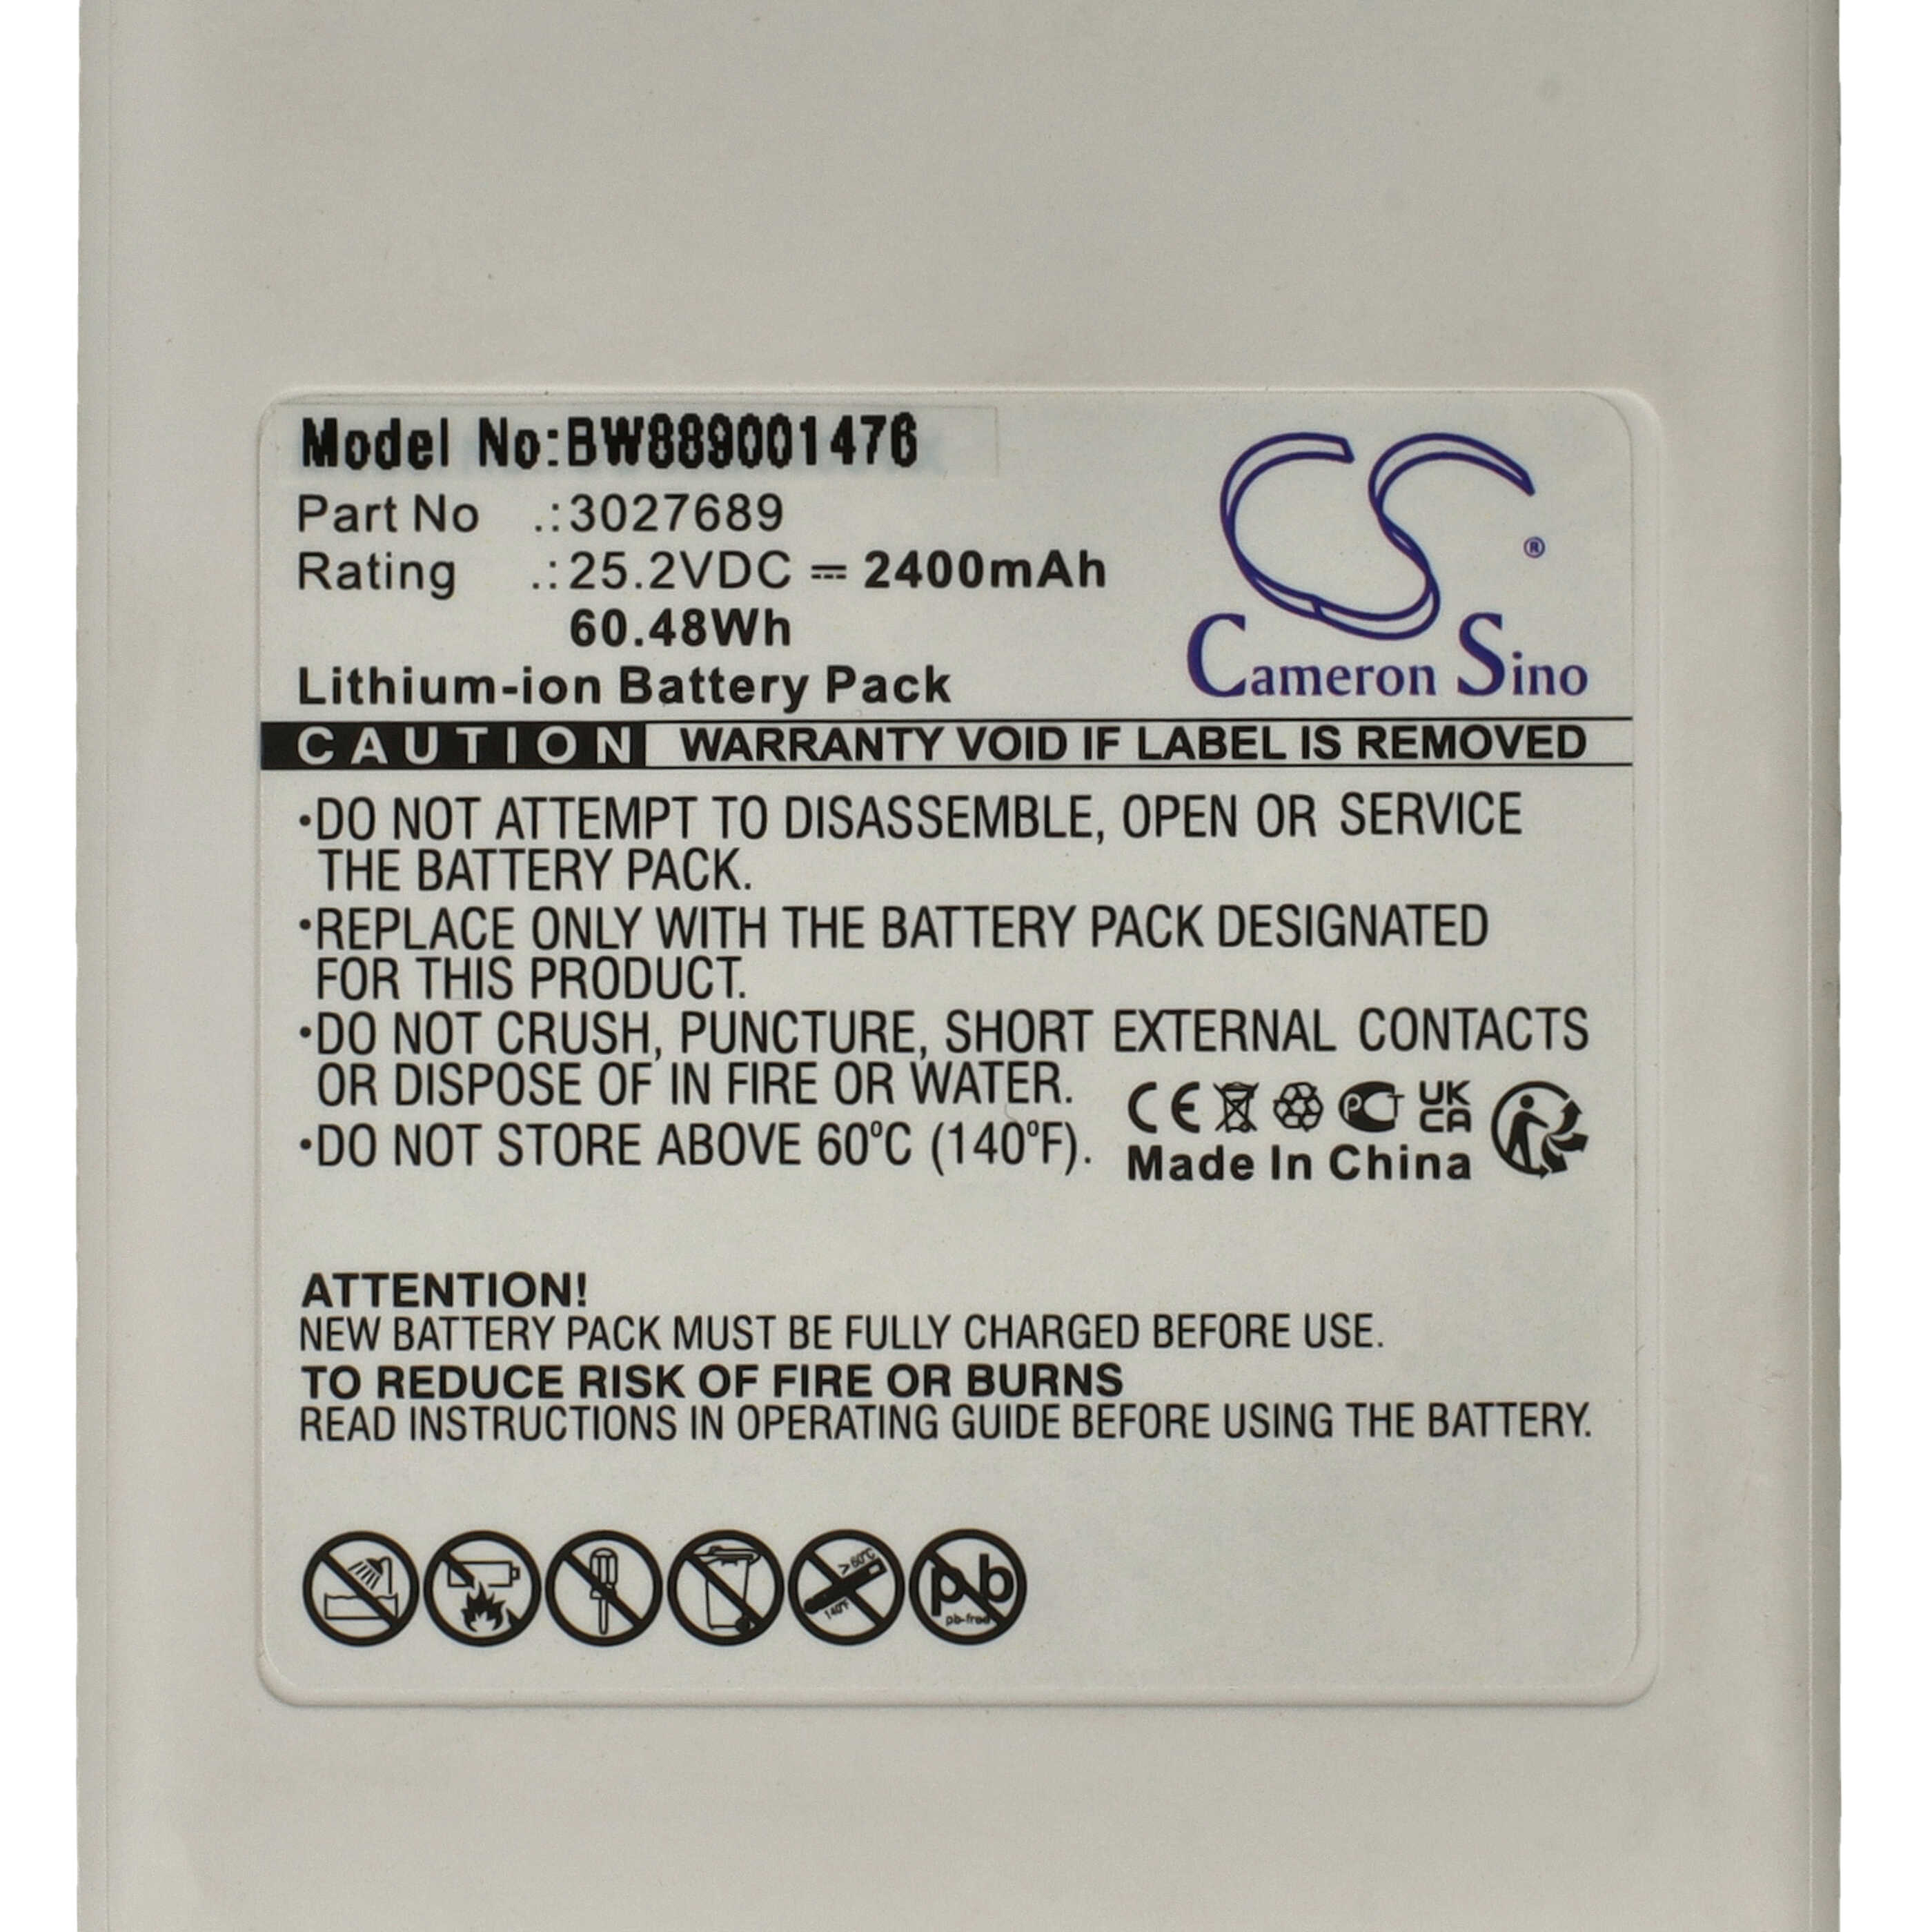 Battery Replacement for Dreame P2046-7S1P-BCB, 3027689, P2046-7S1P-BCA for - 2400mAh, 25.2V, Li-Ion